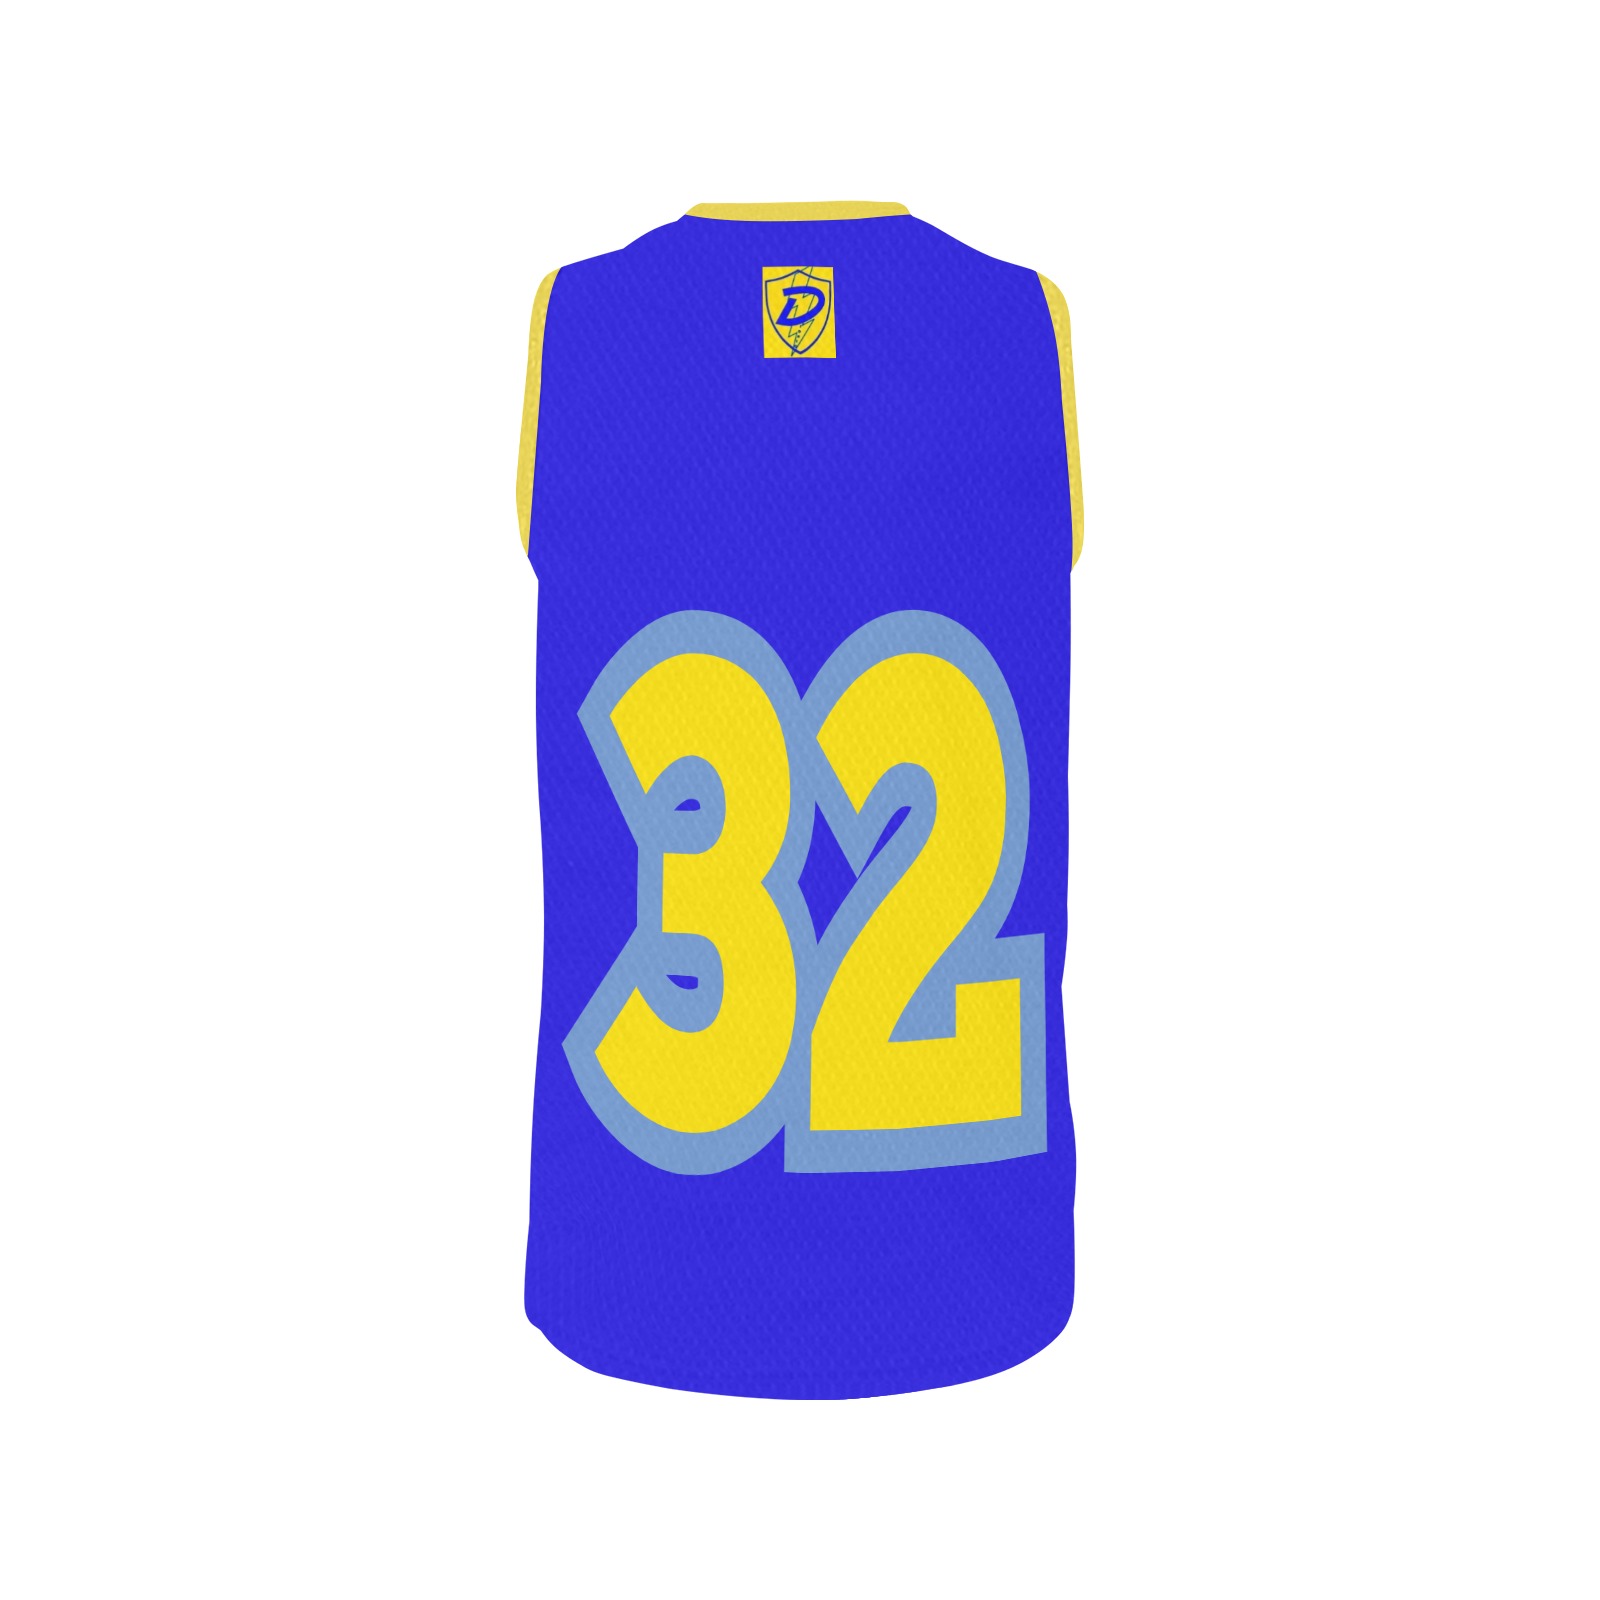 DIONIO Clothing - Basketball Jersey (Blue & Yellow #32) All Over Print Basketball Jersey